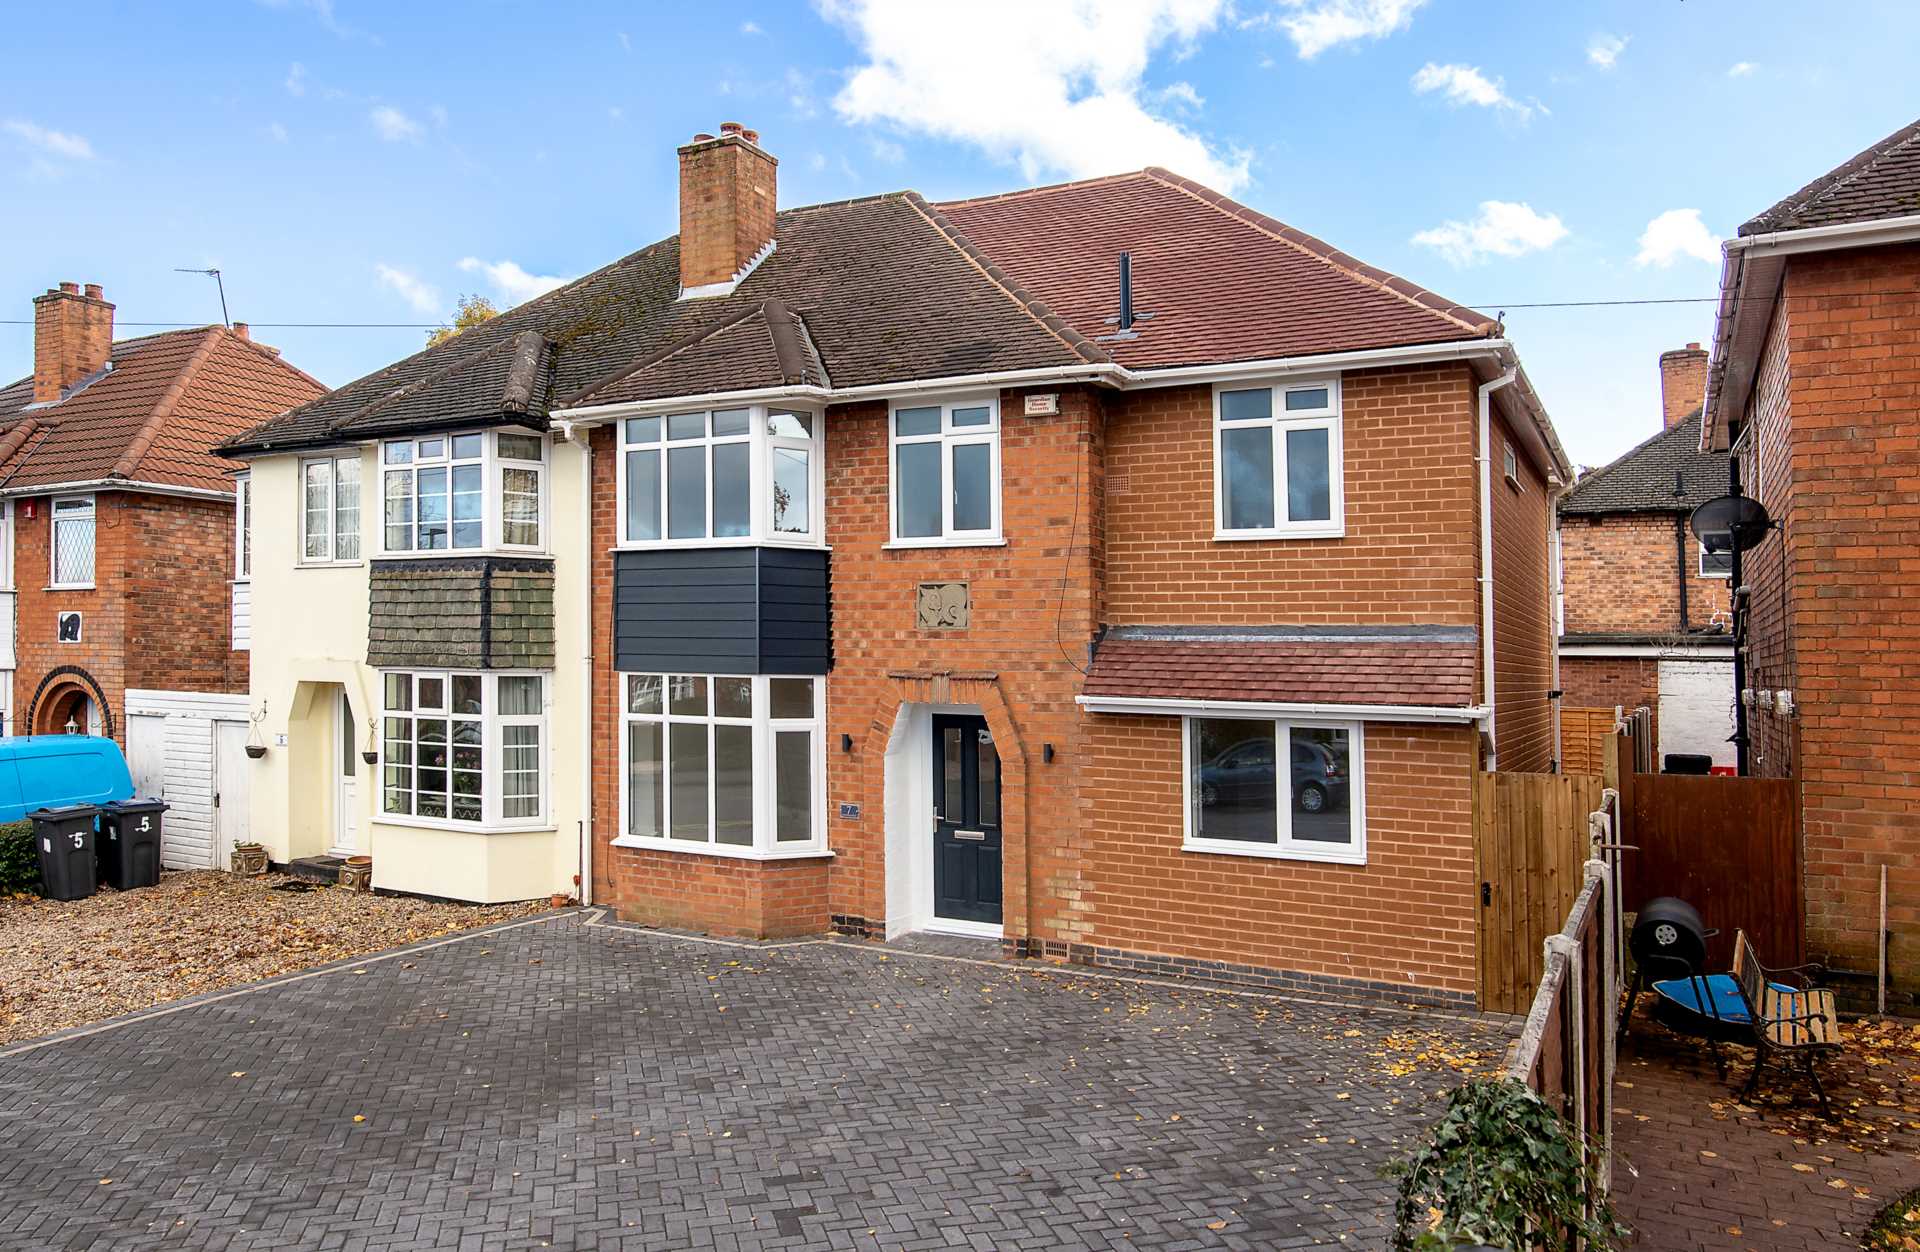 4 bed Semi-Detached House for rent in Sutton Coldfield. From Bergason Estate Agents